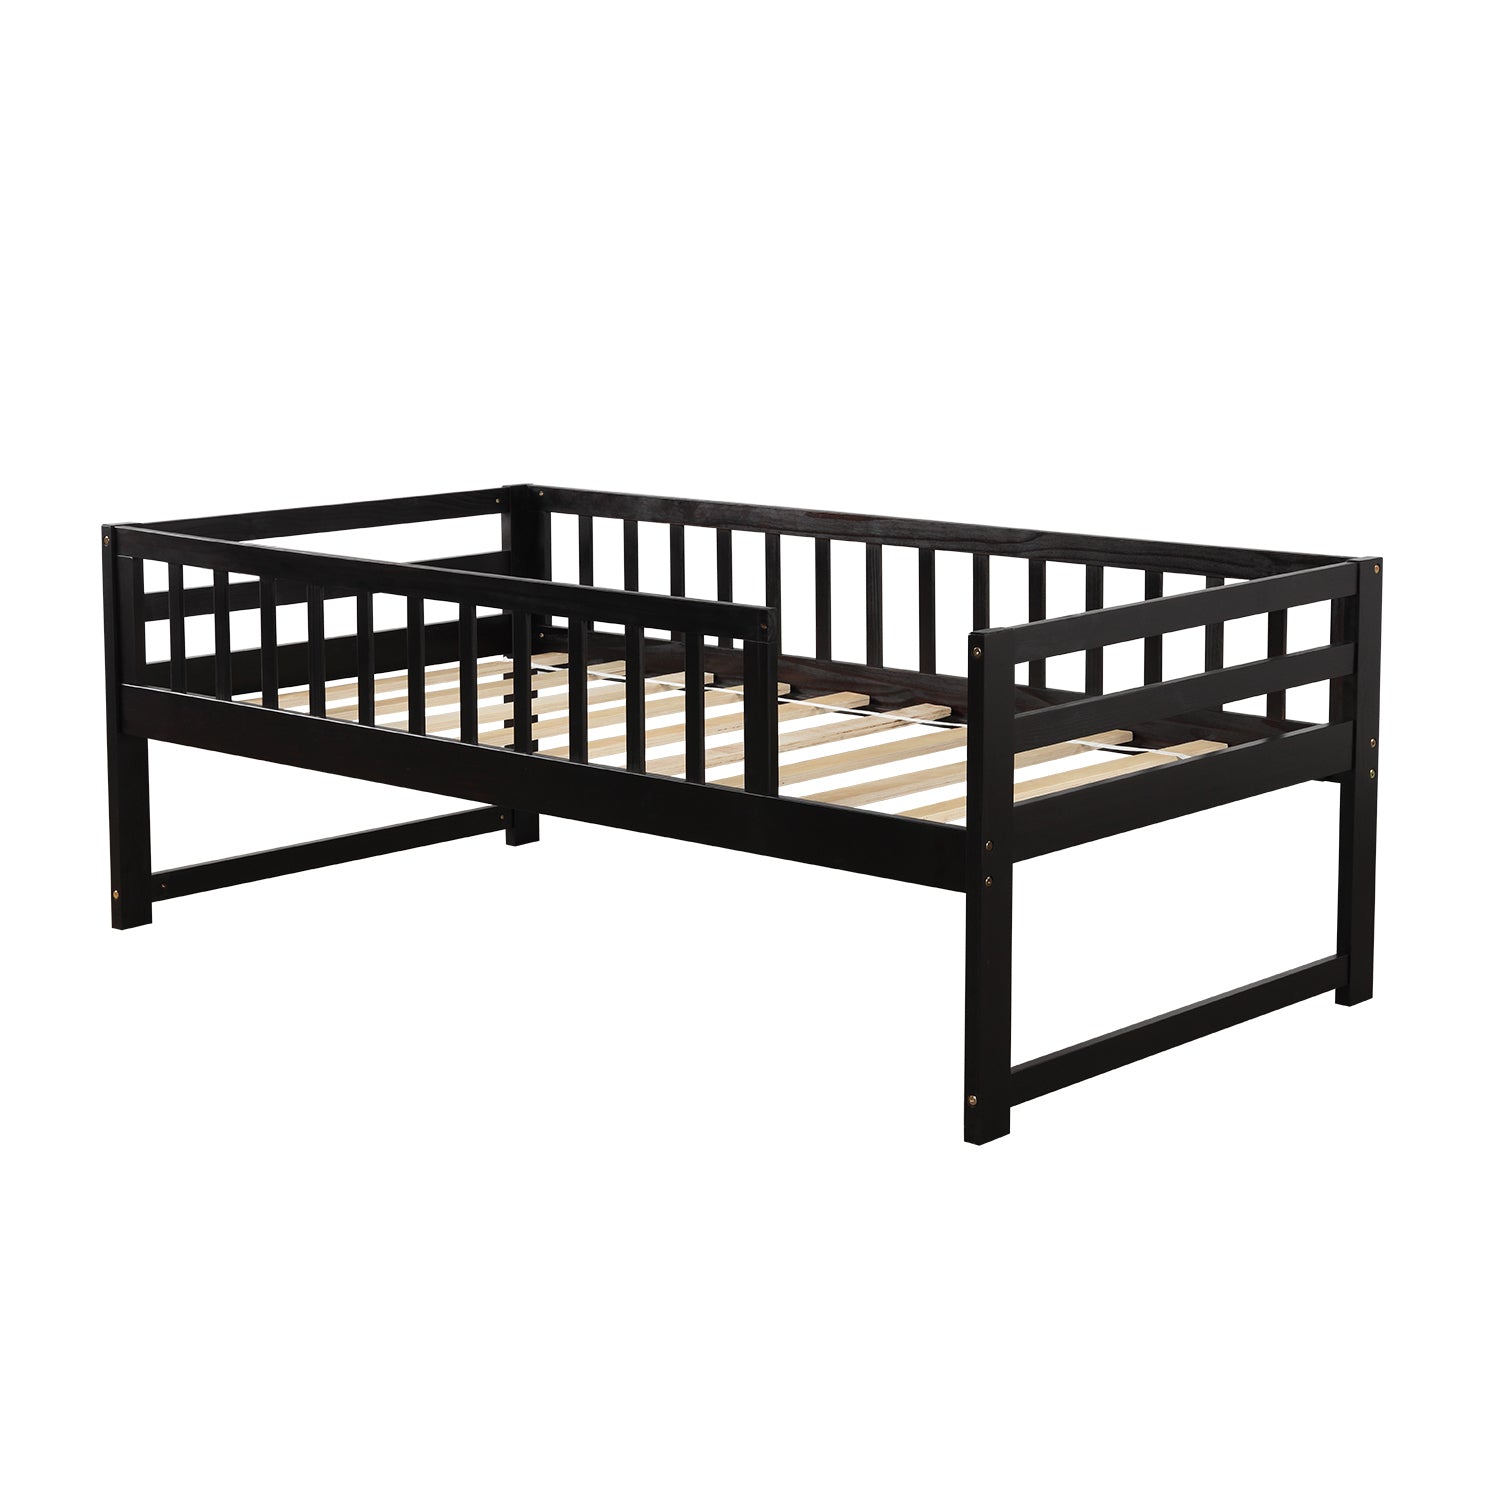 Twin Bunk Beds for Kids with Safety Rail and Movable Trundle bed